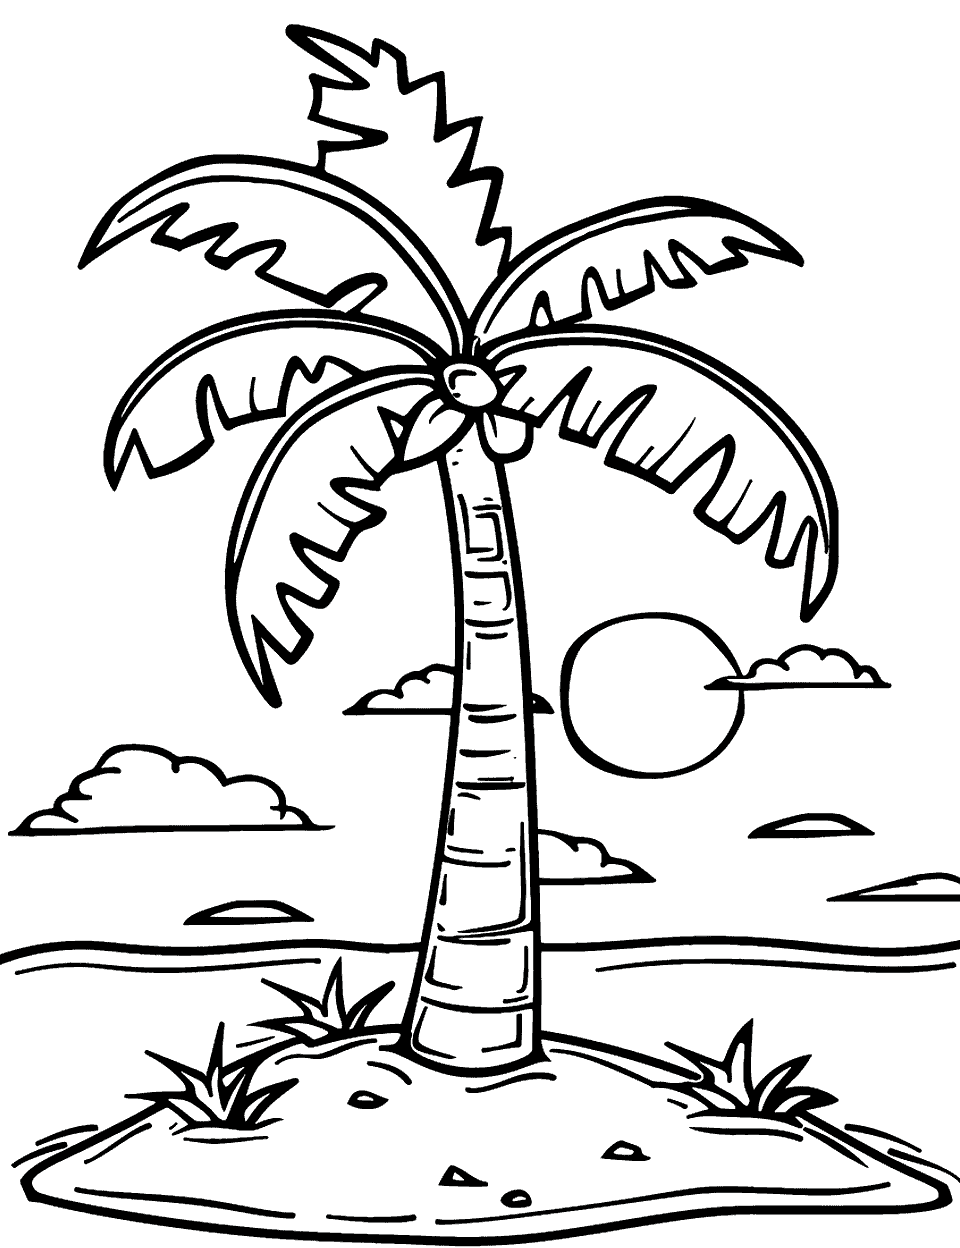 Sunny Palm Tree Coloring Page - A lone palm tree on a small island, with the sun shining brightly behind.